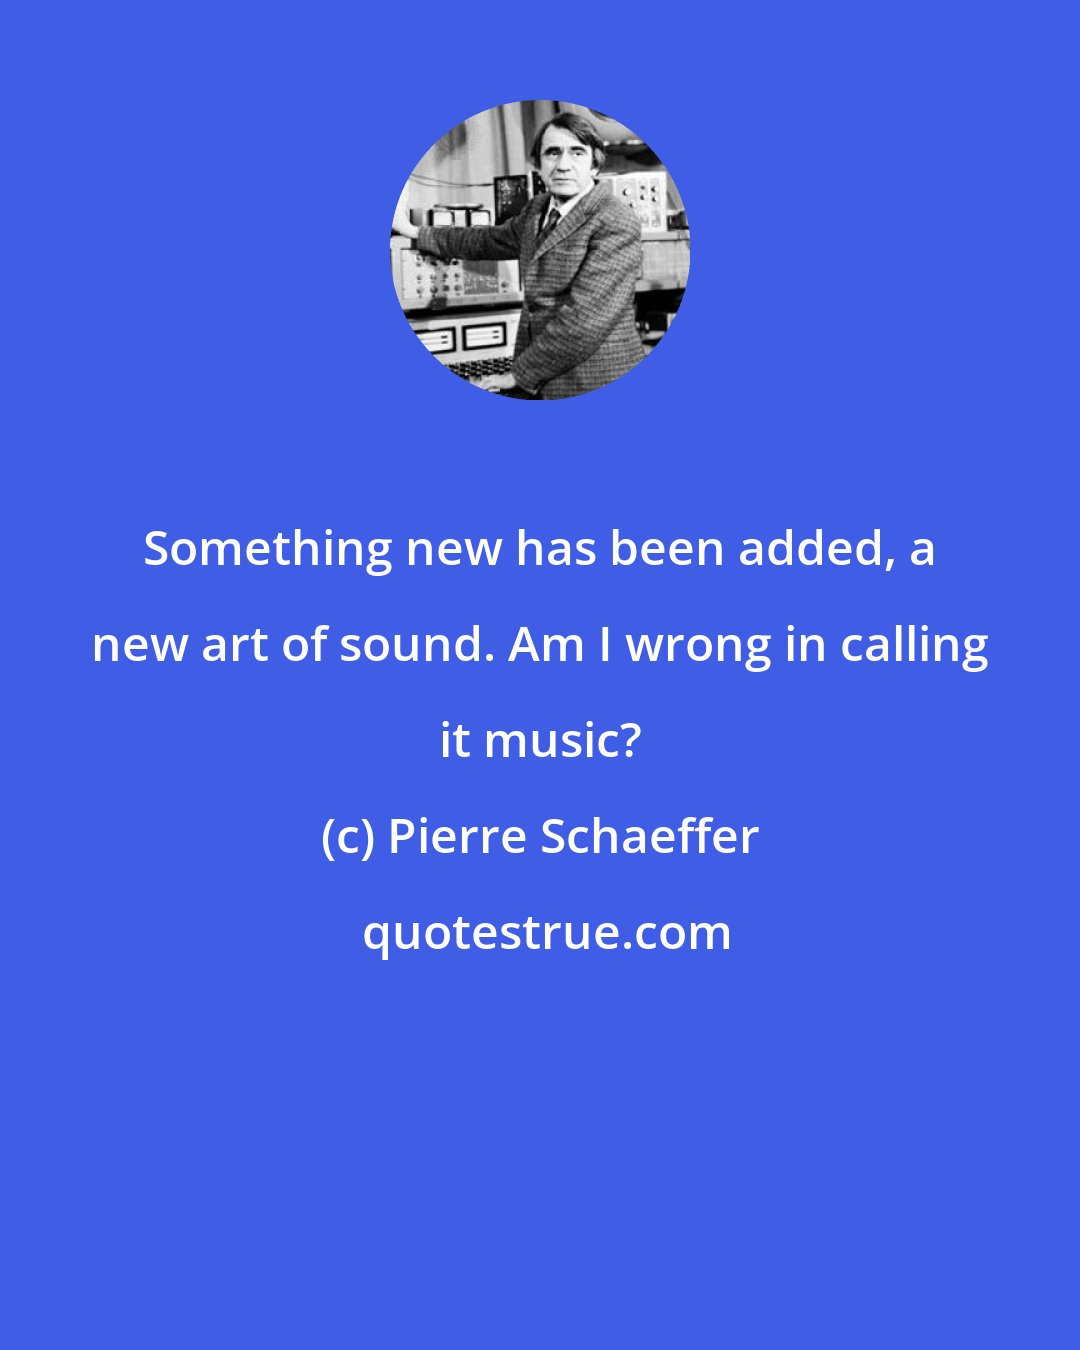 Pierre Schaeffer: Something new has been added, a new art of sound. Am I wrong in calling it music?